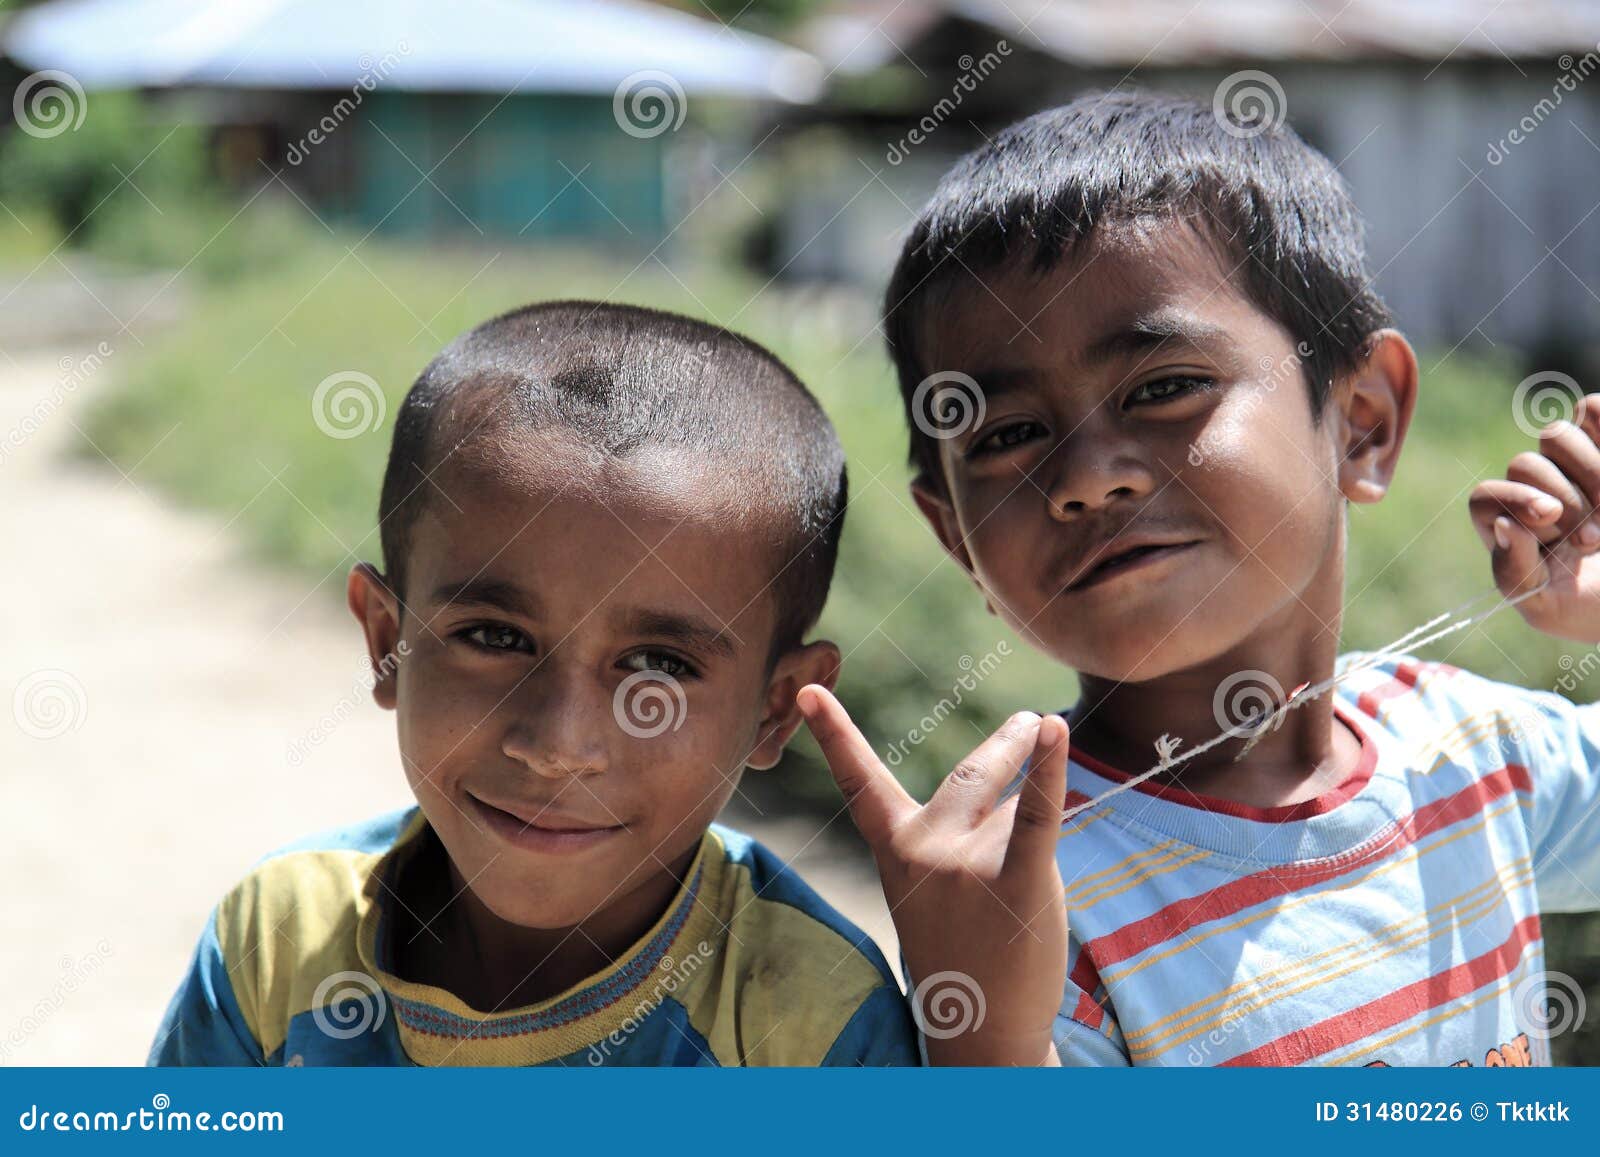 Indonesian Children Boy Smiling Editorial Photo - Image of flores ...